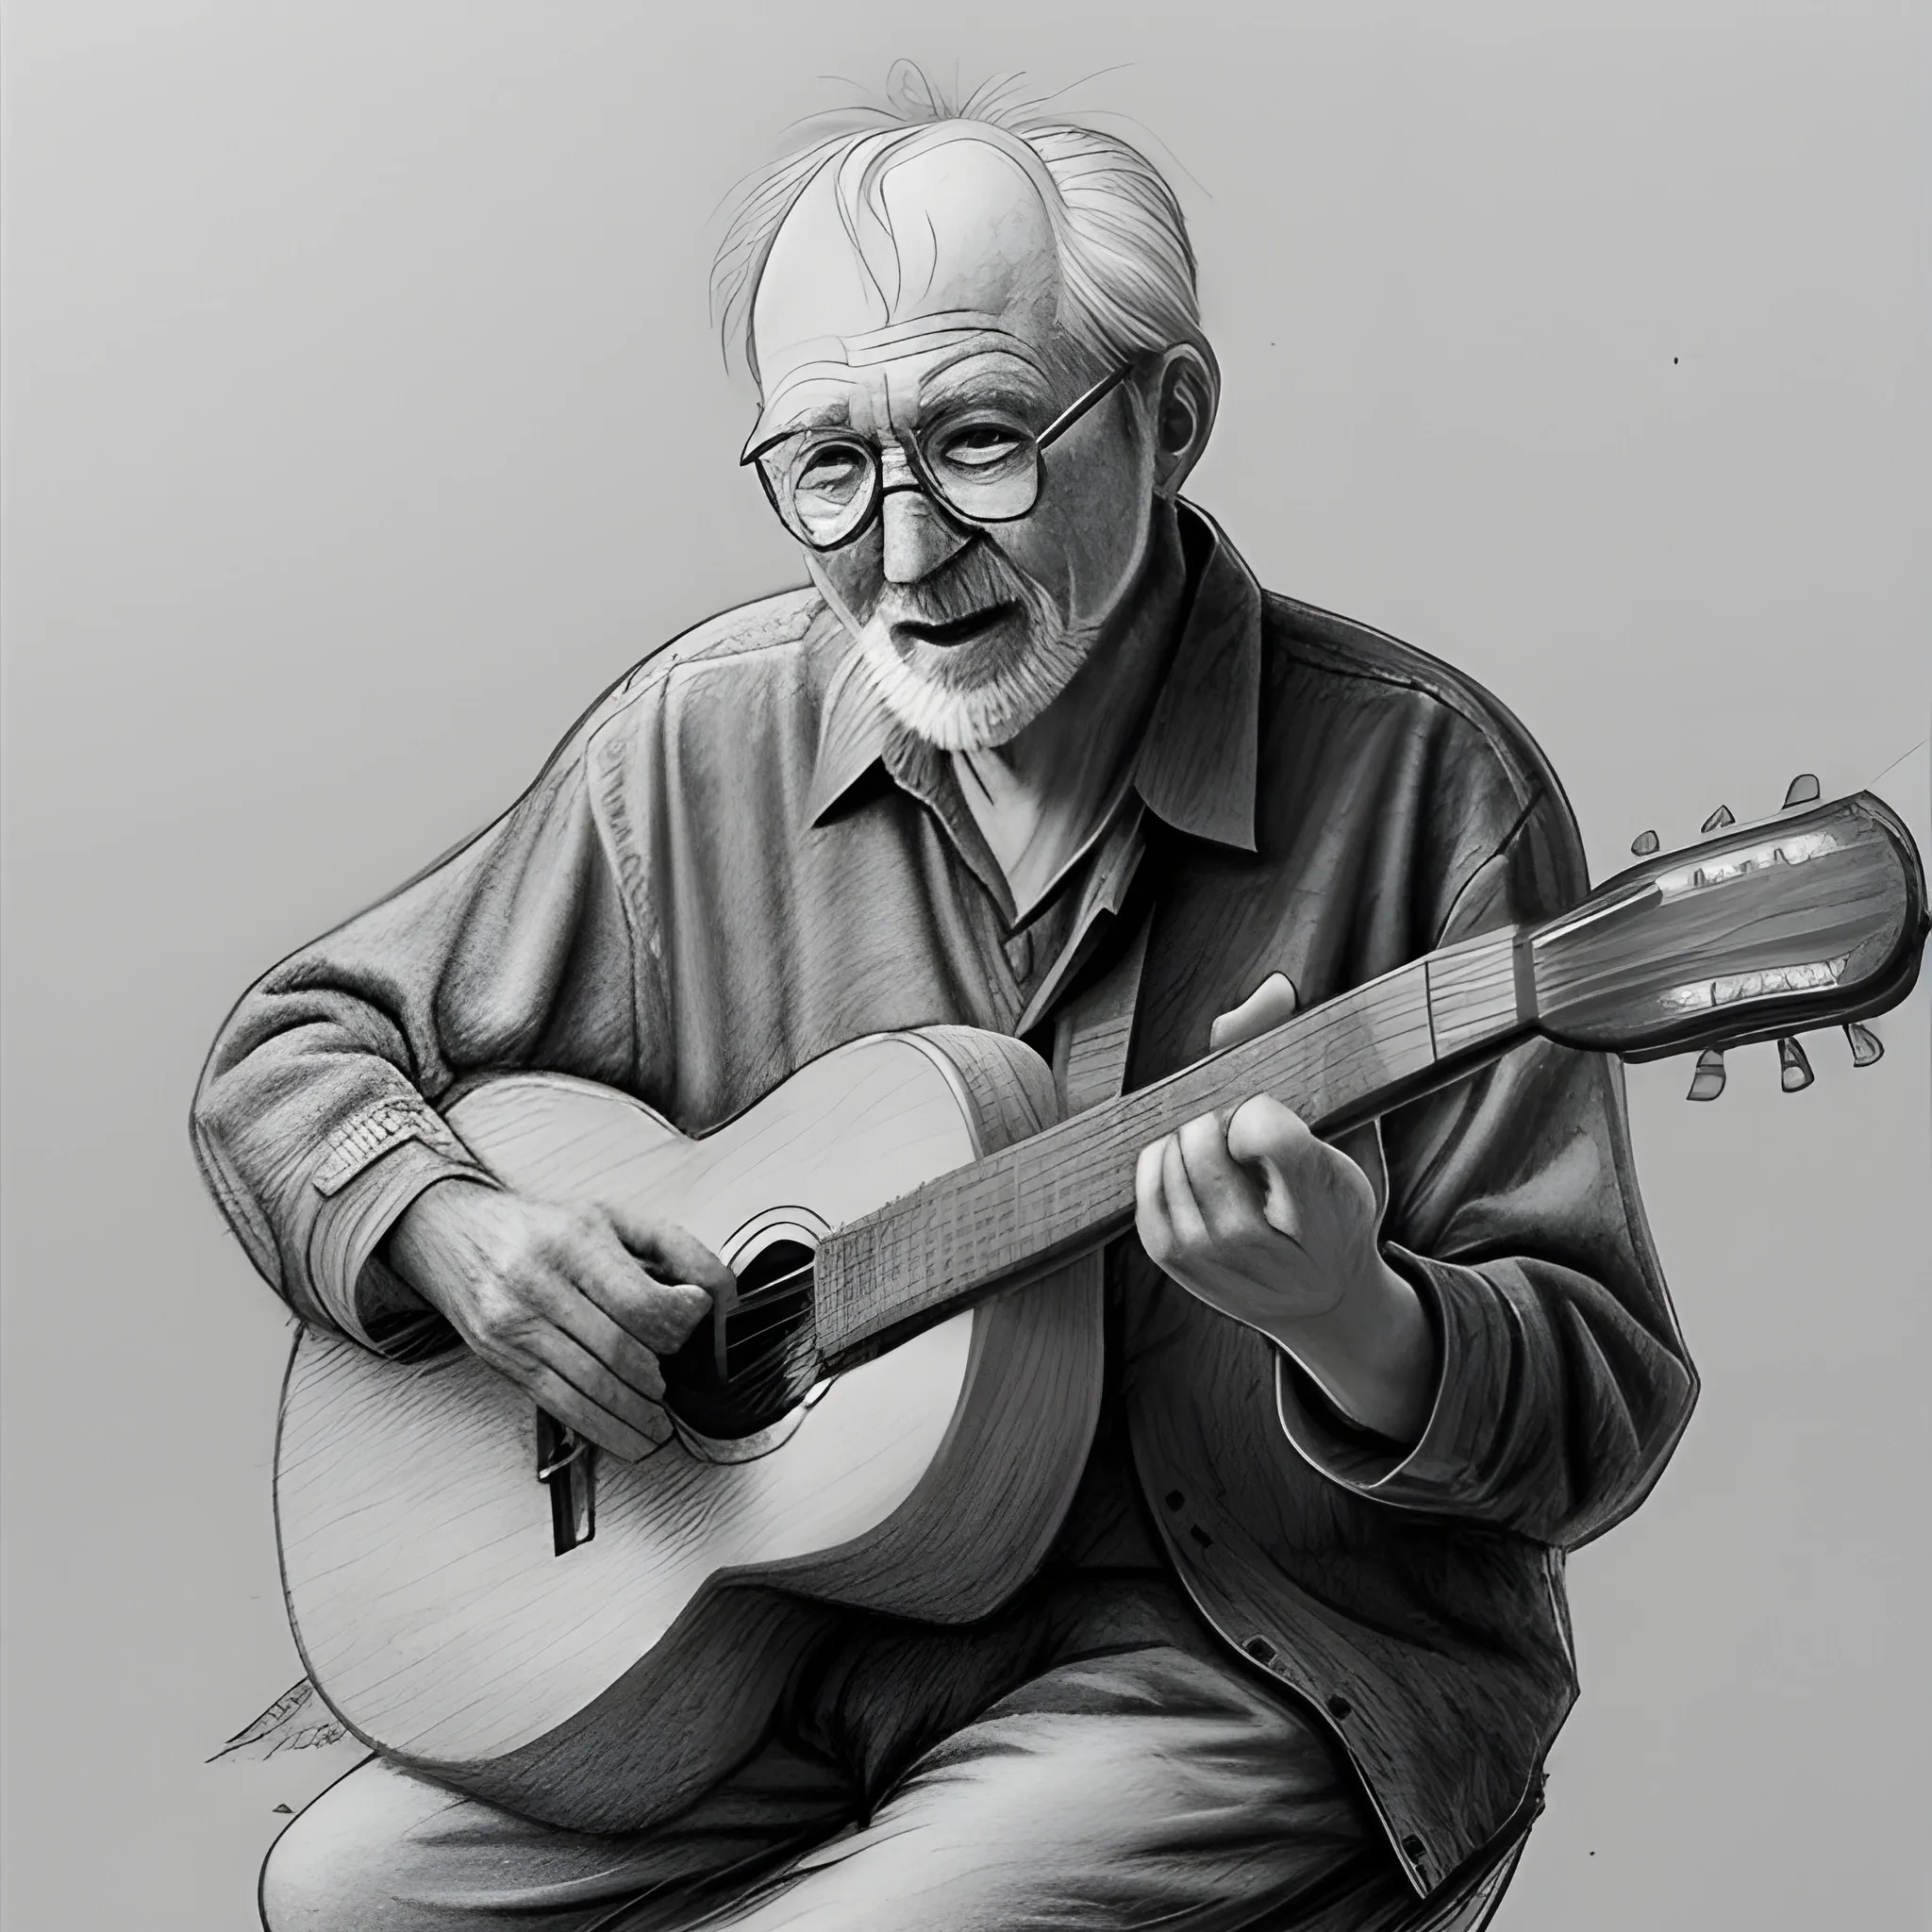 pencil drawing of a guitar